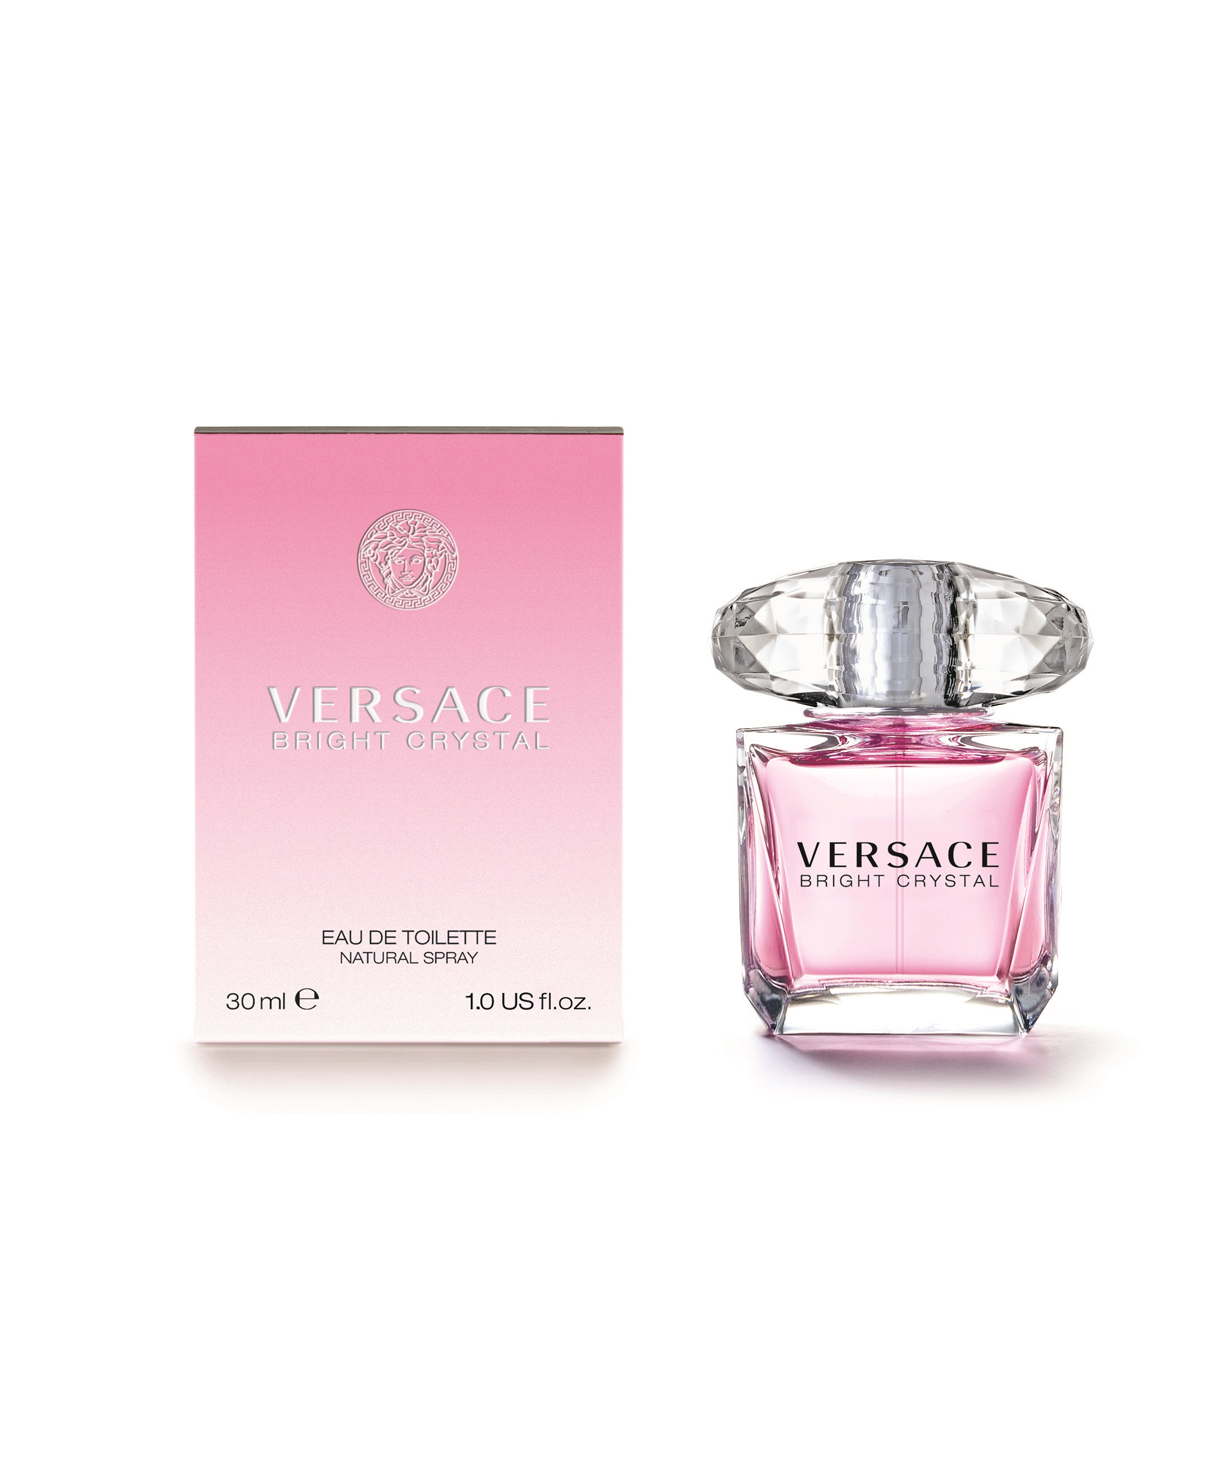 Perfume «Versace» Bright Crystal, for women, 30 ml